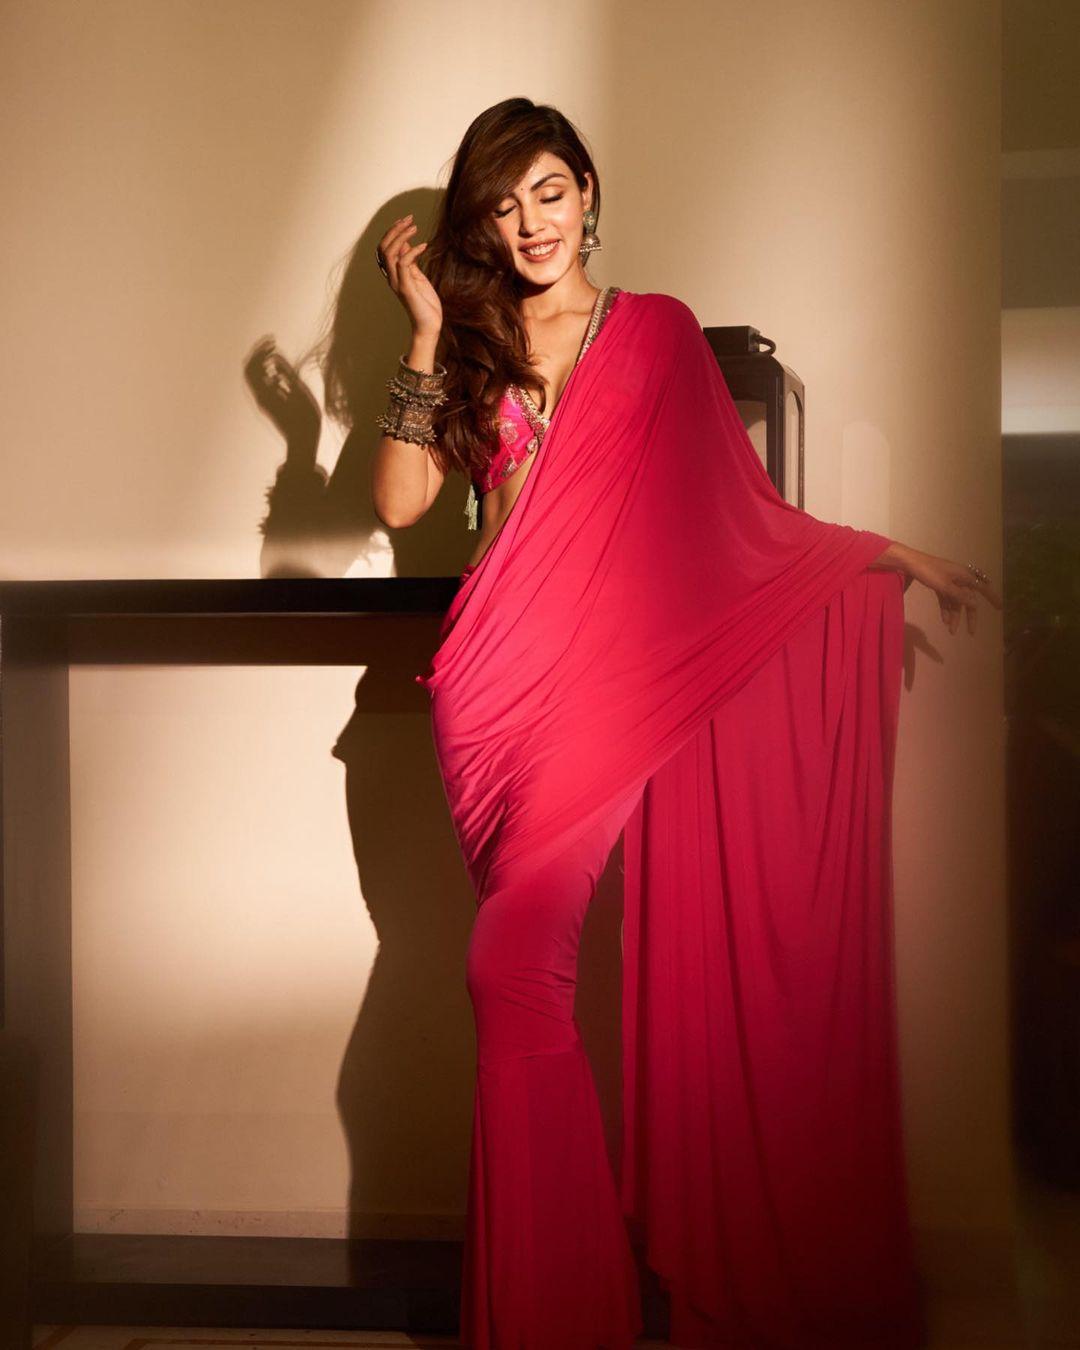 Veere di wedding time? Get your ethnic shoes ready and drape yourself in a beautiful saree just like Rhea did